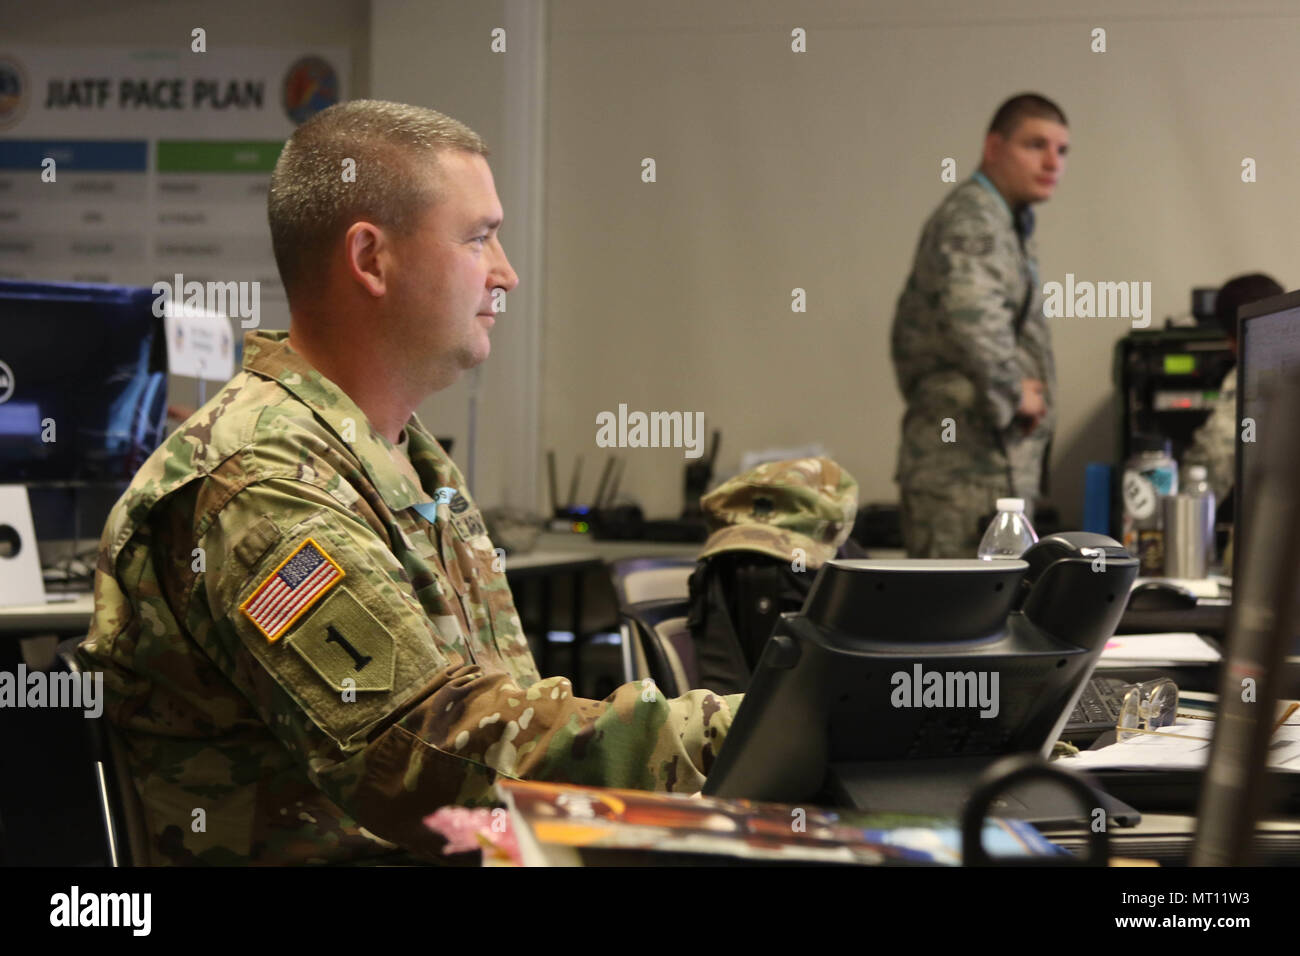 Lt. Col. Larry Boggs, plans and integrations officer for the West Virginia National Guard, monitors operations for the 2017 National Jamboree July 21, at the Glen Jean Armory in Glen Jean, W. Va.  The 2017 National Jamboree is being attended by 30,000 scouts, troop leaders, volunteers and professional staff members, as well as more than 15,000 visitors. Approximately 1,200 military members from the Department of Defense and the U.S. Coast Guard are providing logistical support for the event. (U.S. Army photo by Sgt. Ondirae H. Abdullah-Robinson/22nd Mobile Public Affairs Detachment) Stock Photo